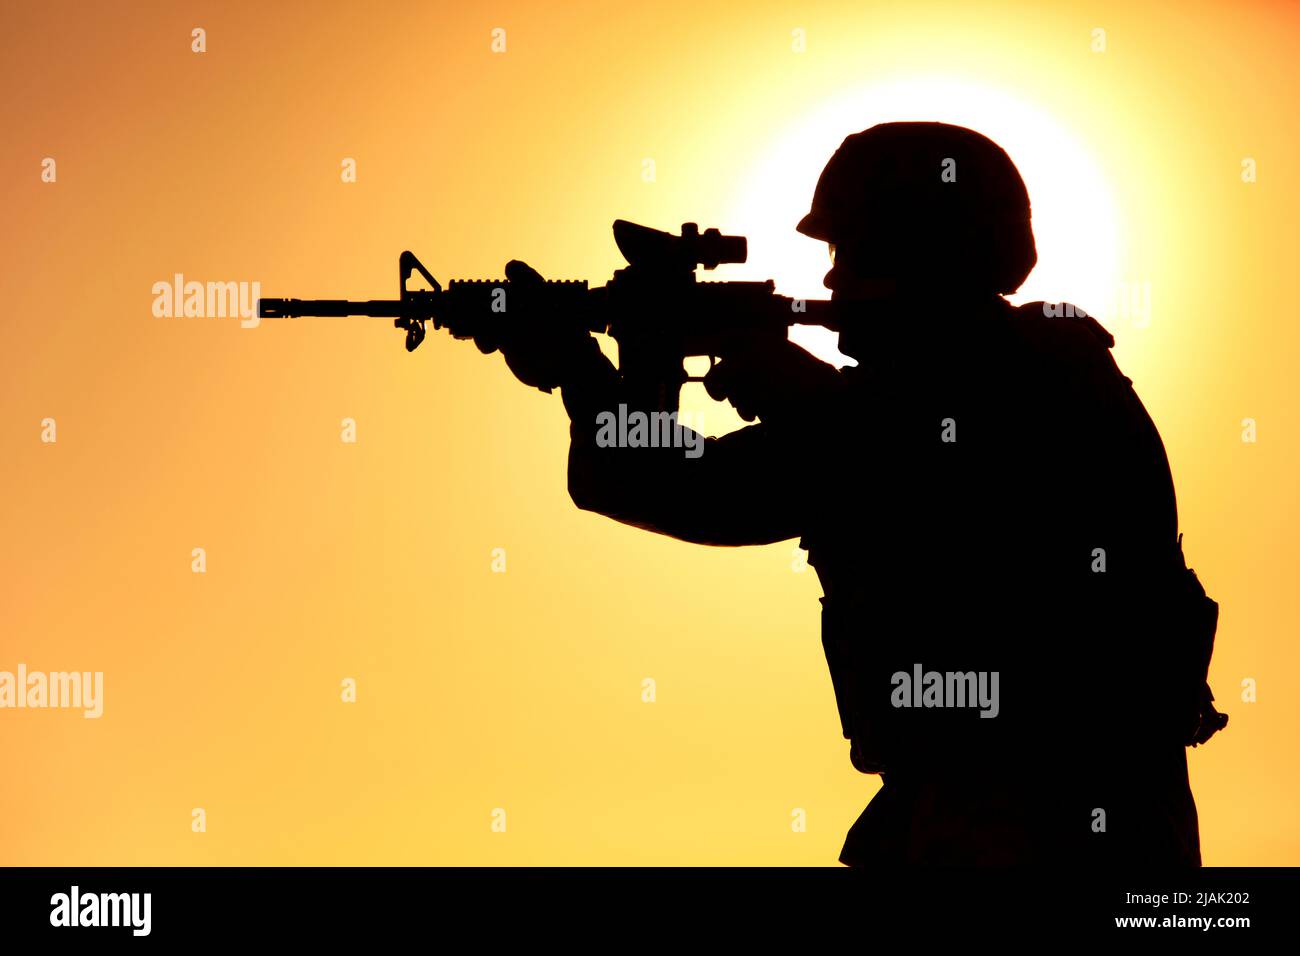 Silhouette of a soldier shooting assault rifle against a sunlit night sky. Stock Photo